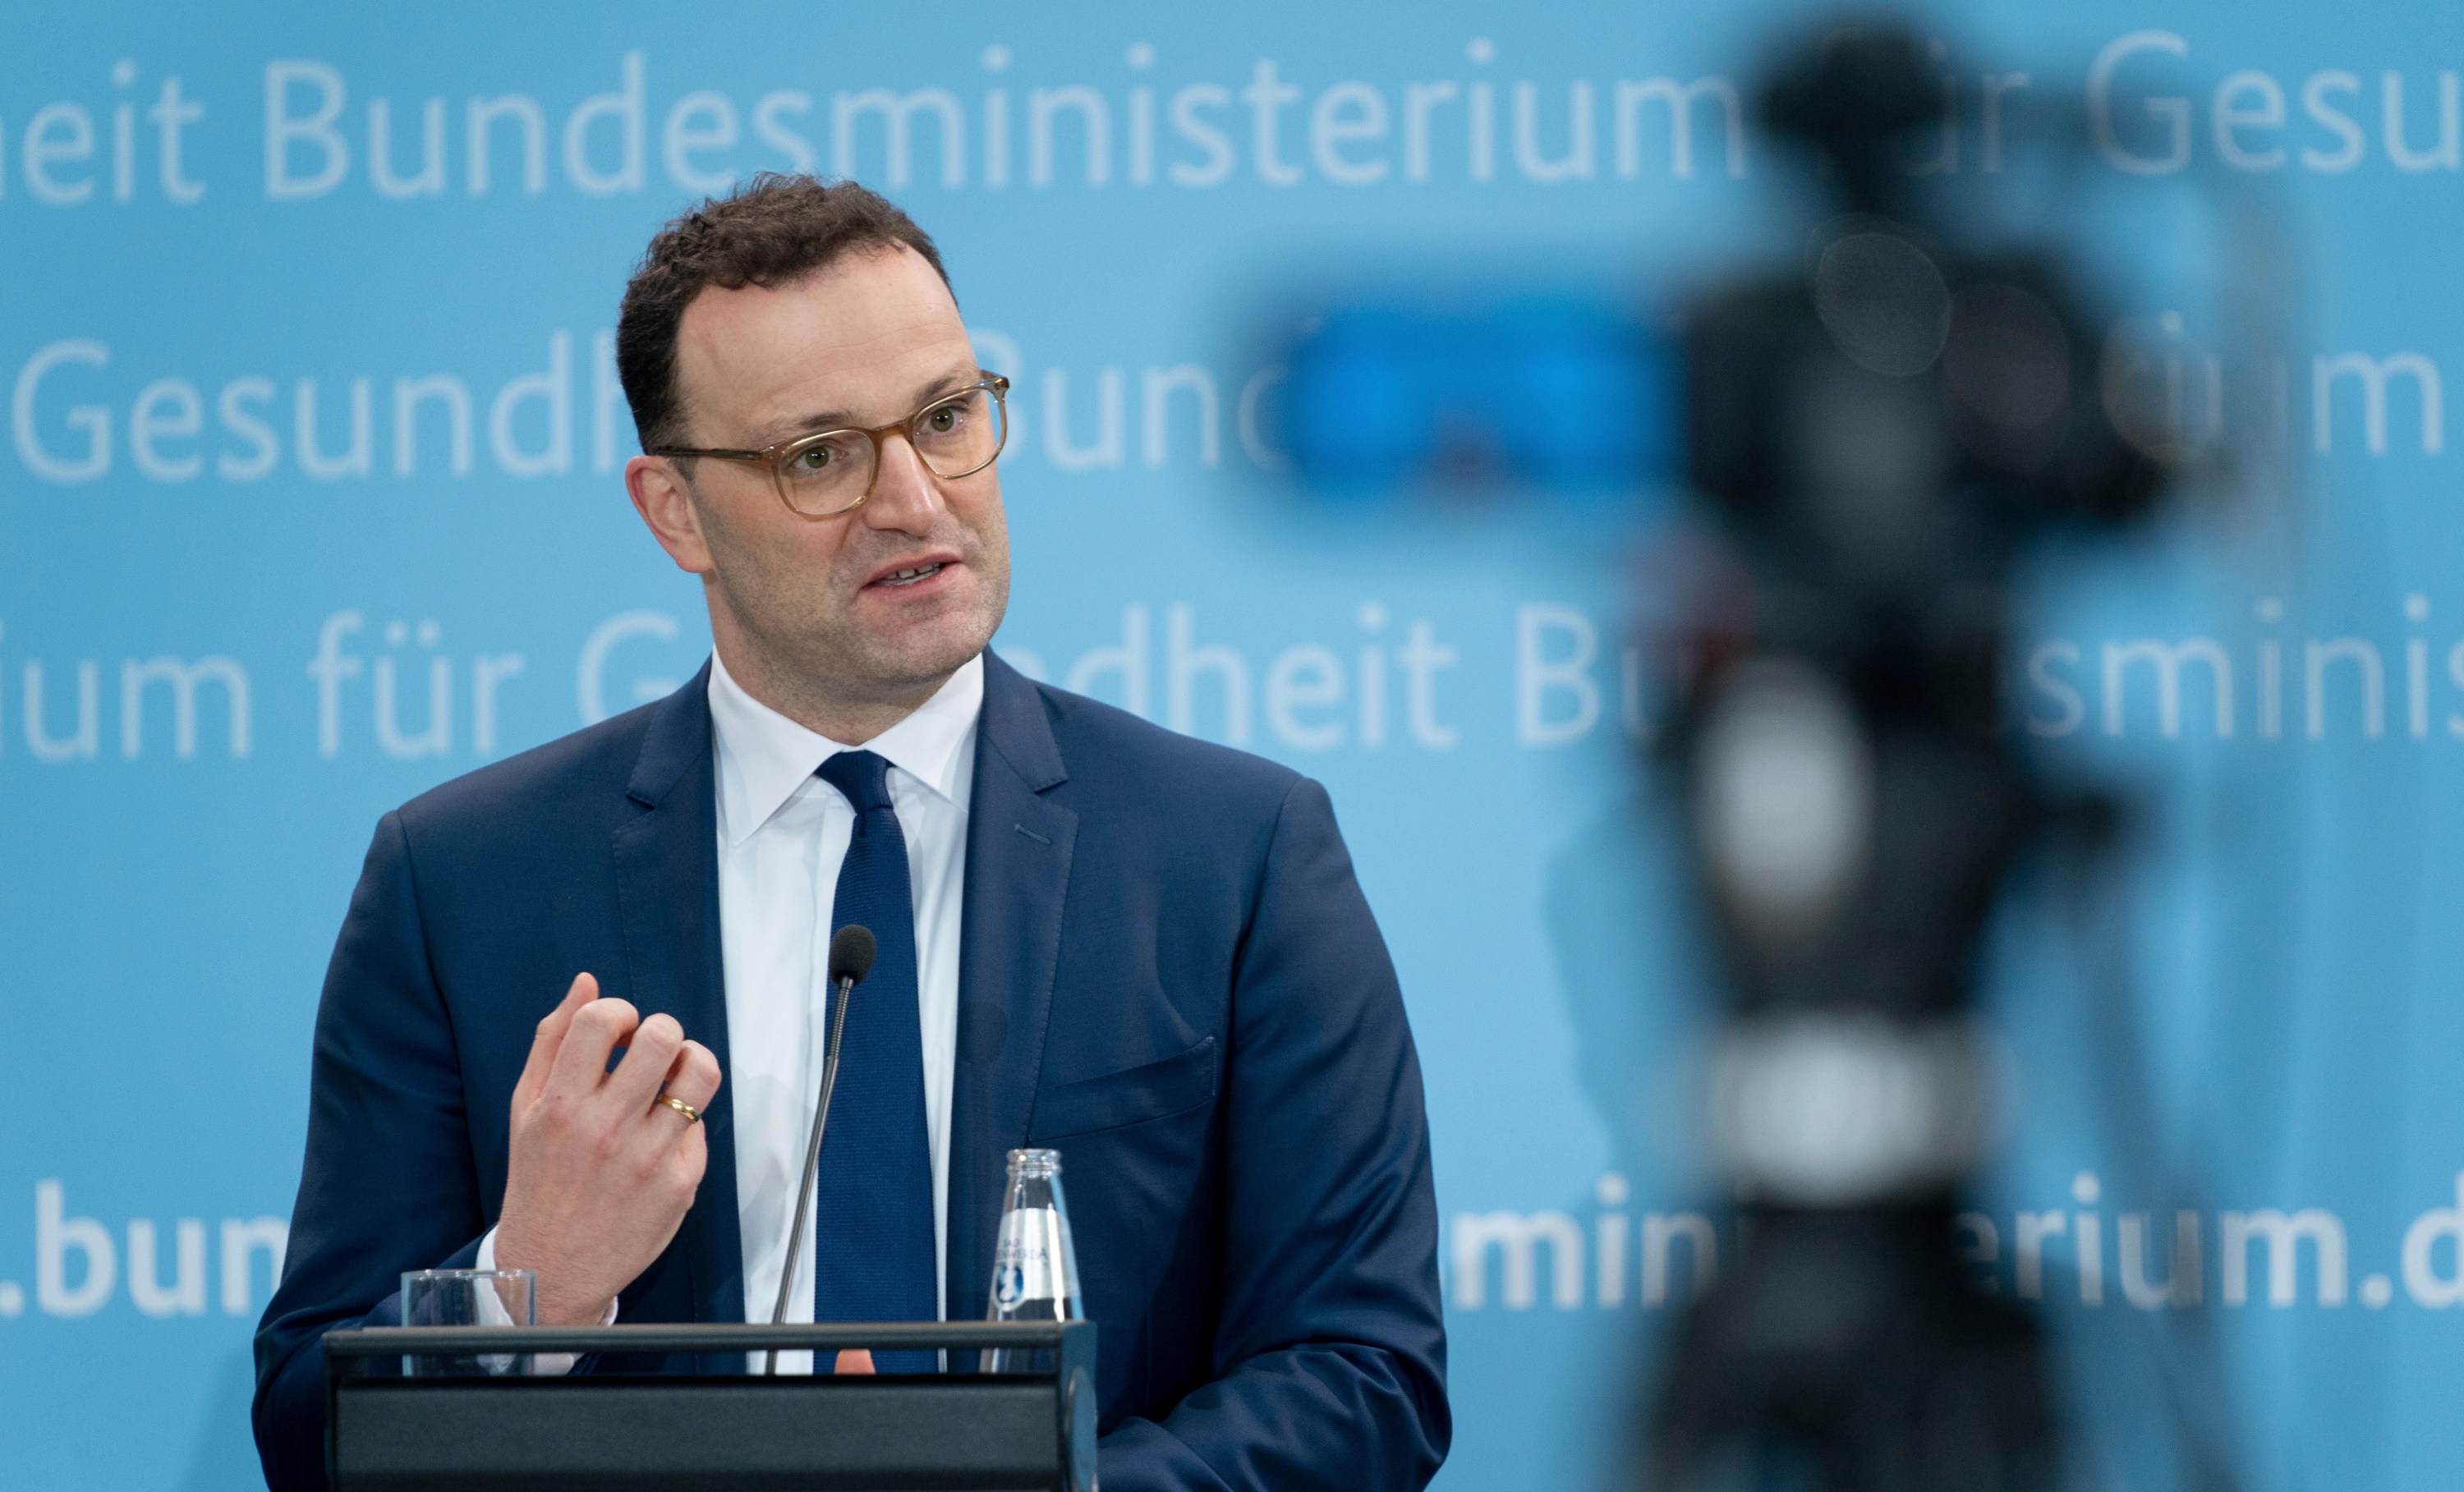 Jens Spahn (CDU), Federal Minister of Health, comments on the suspension of Astrazeneca's Corona vaccine at a press conference.